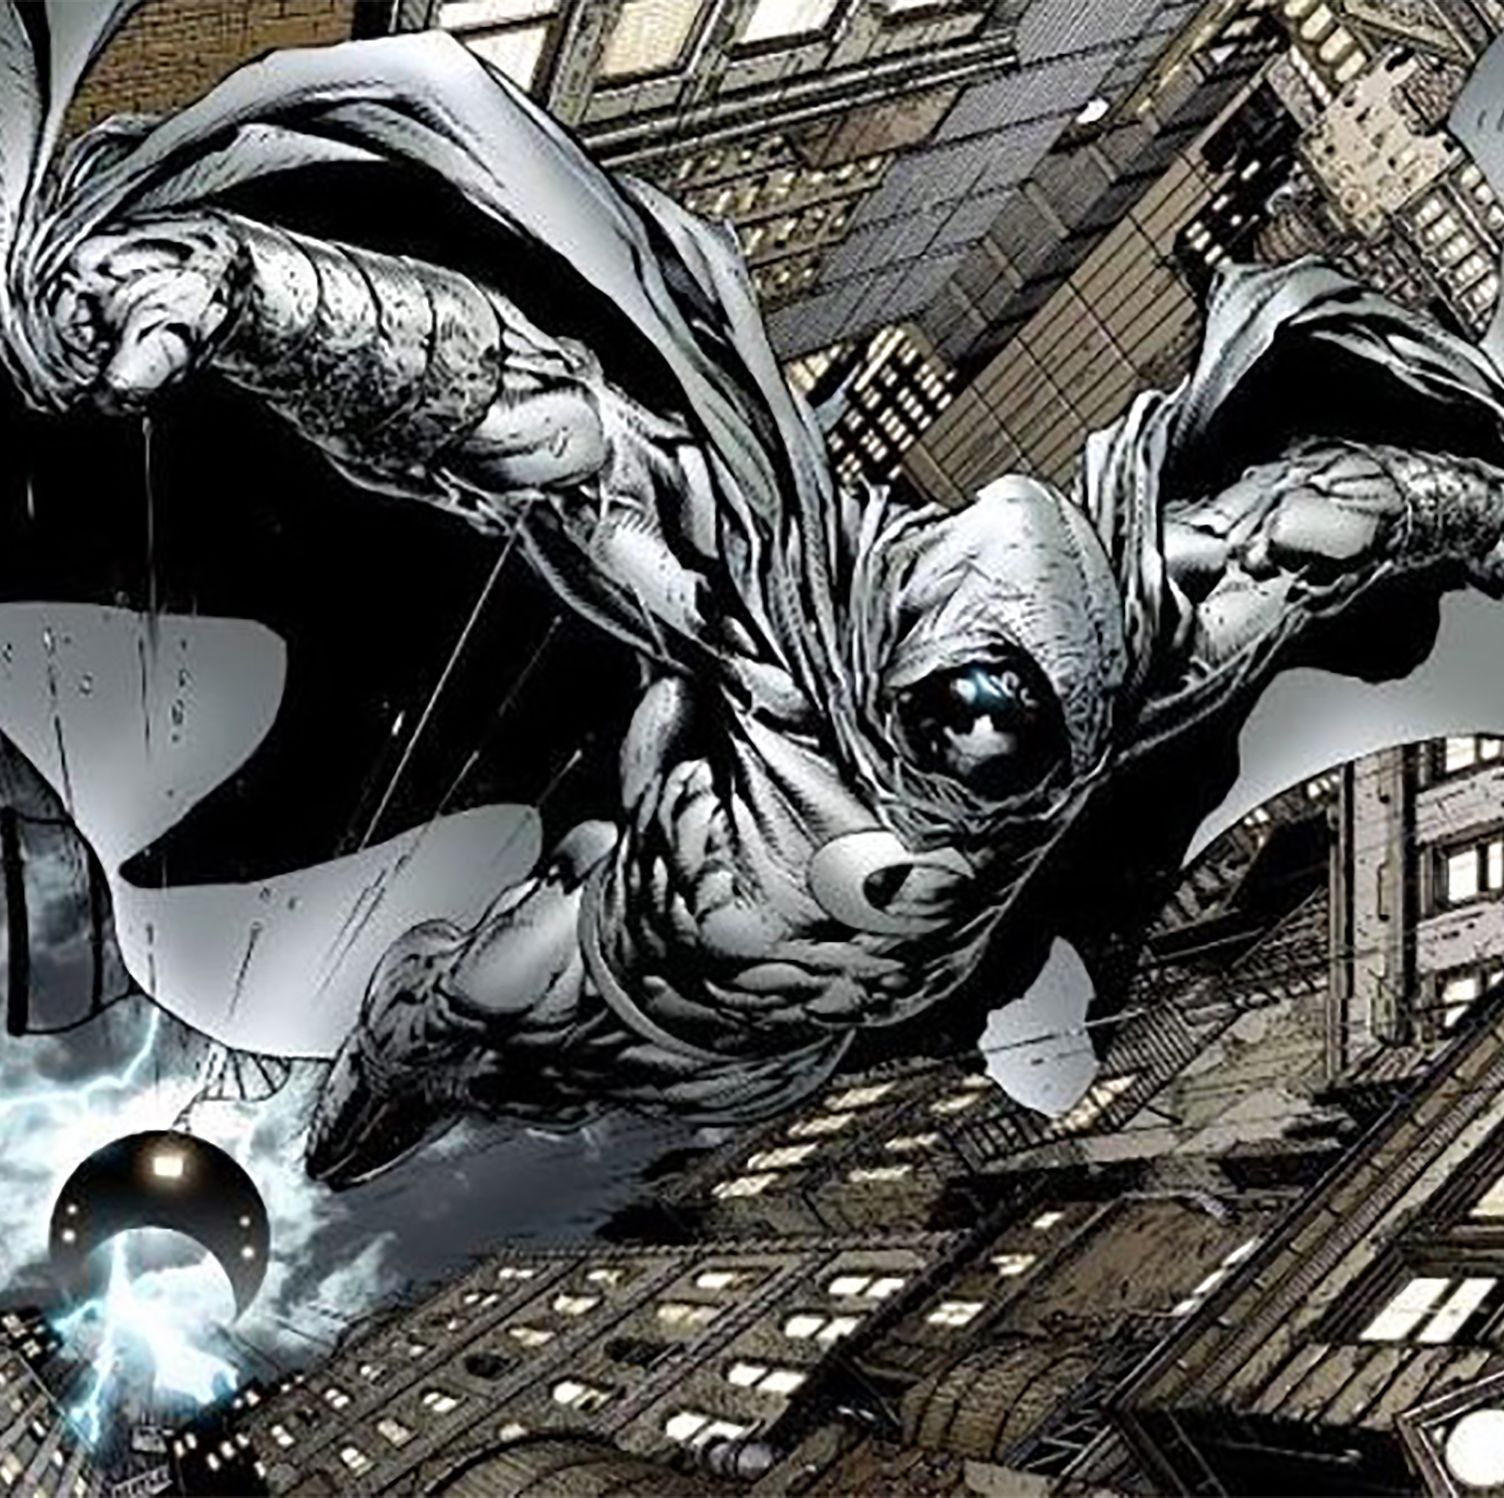 Moon Knight Trailer: Why the MCU Series Is Very Different From the Comics